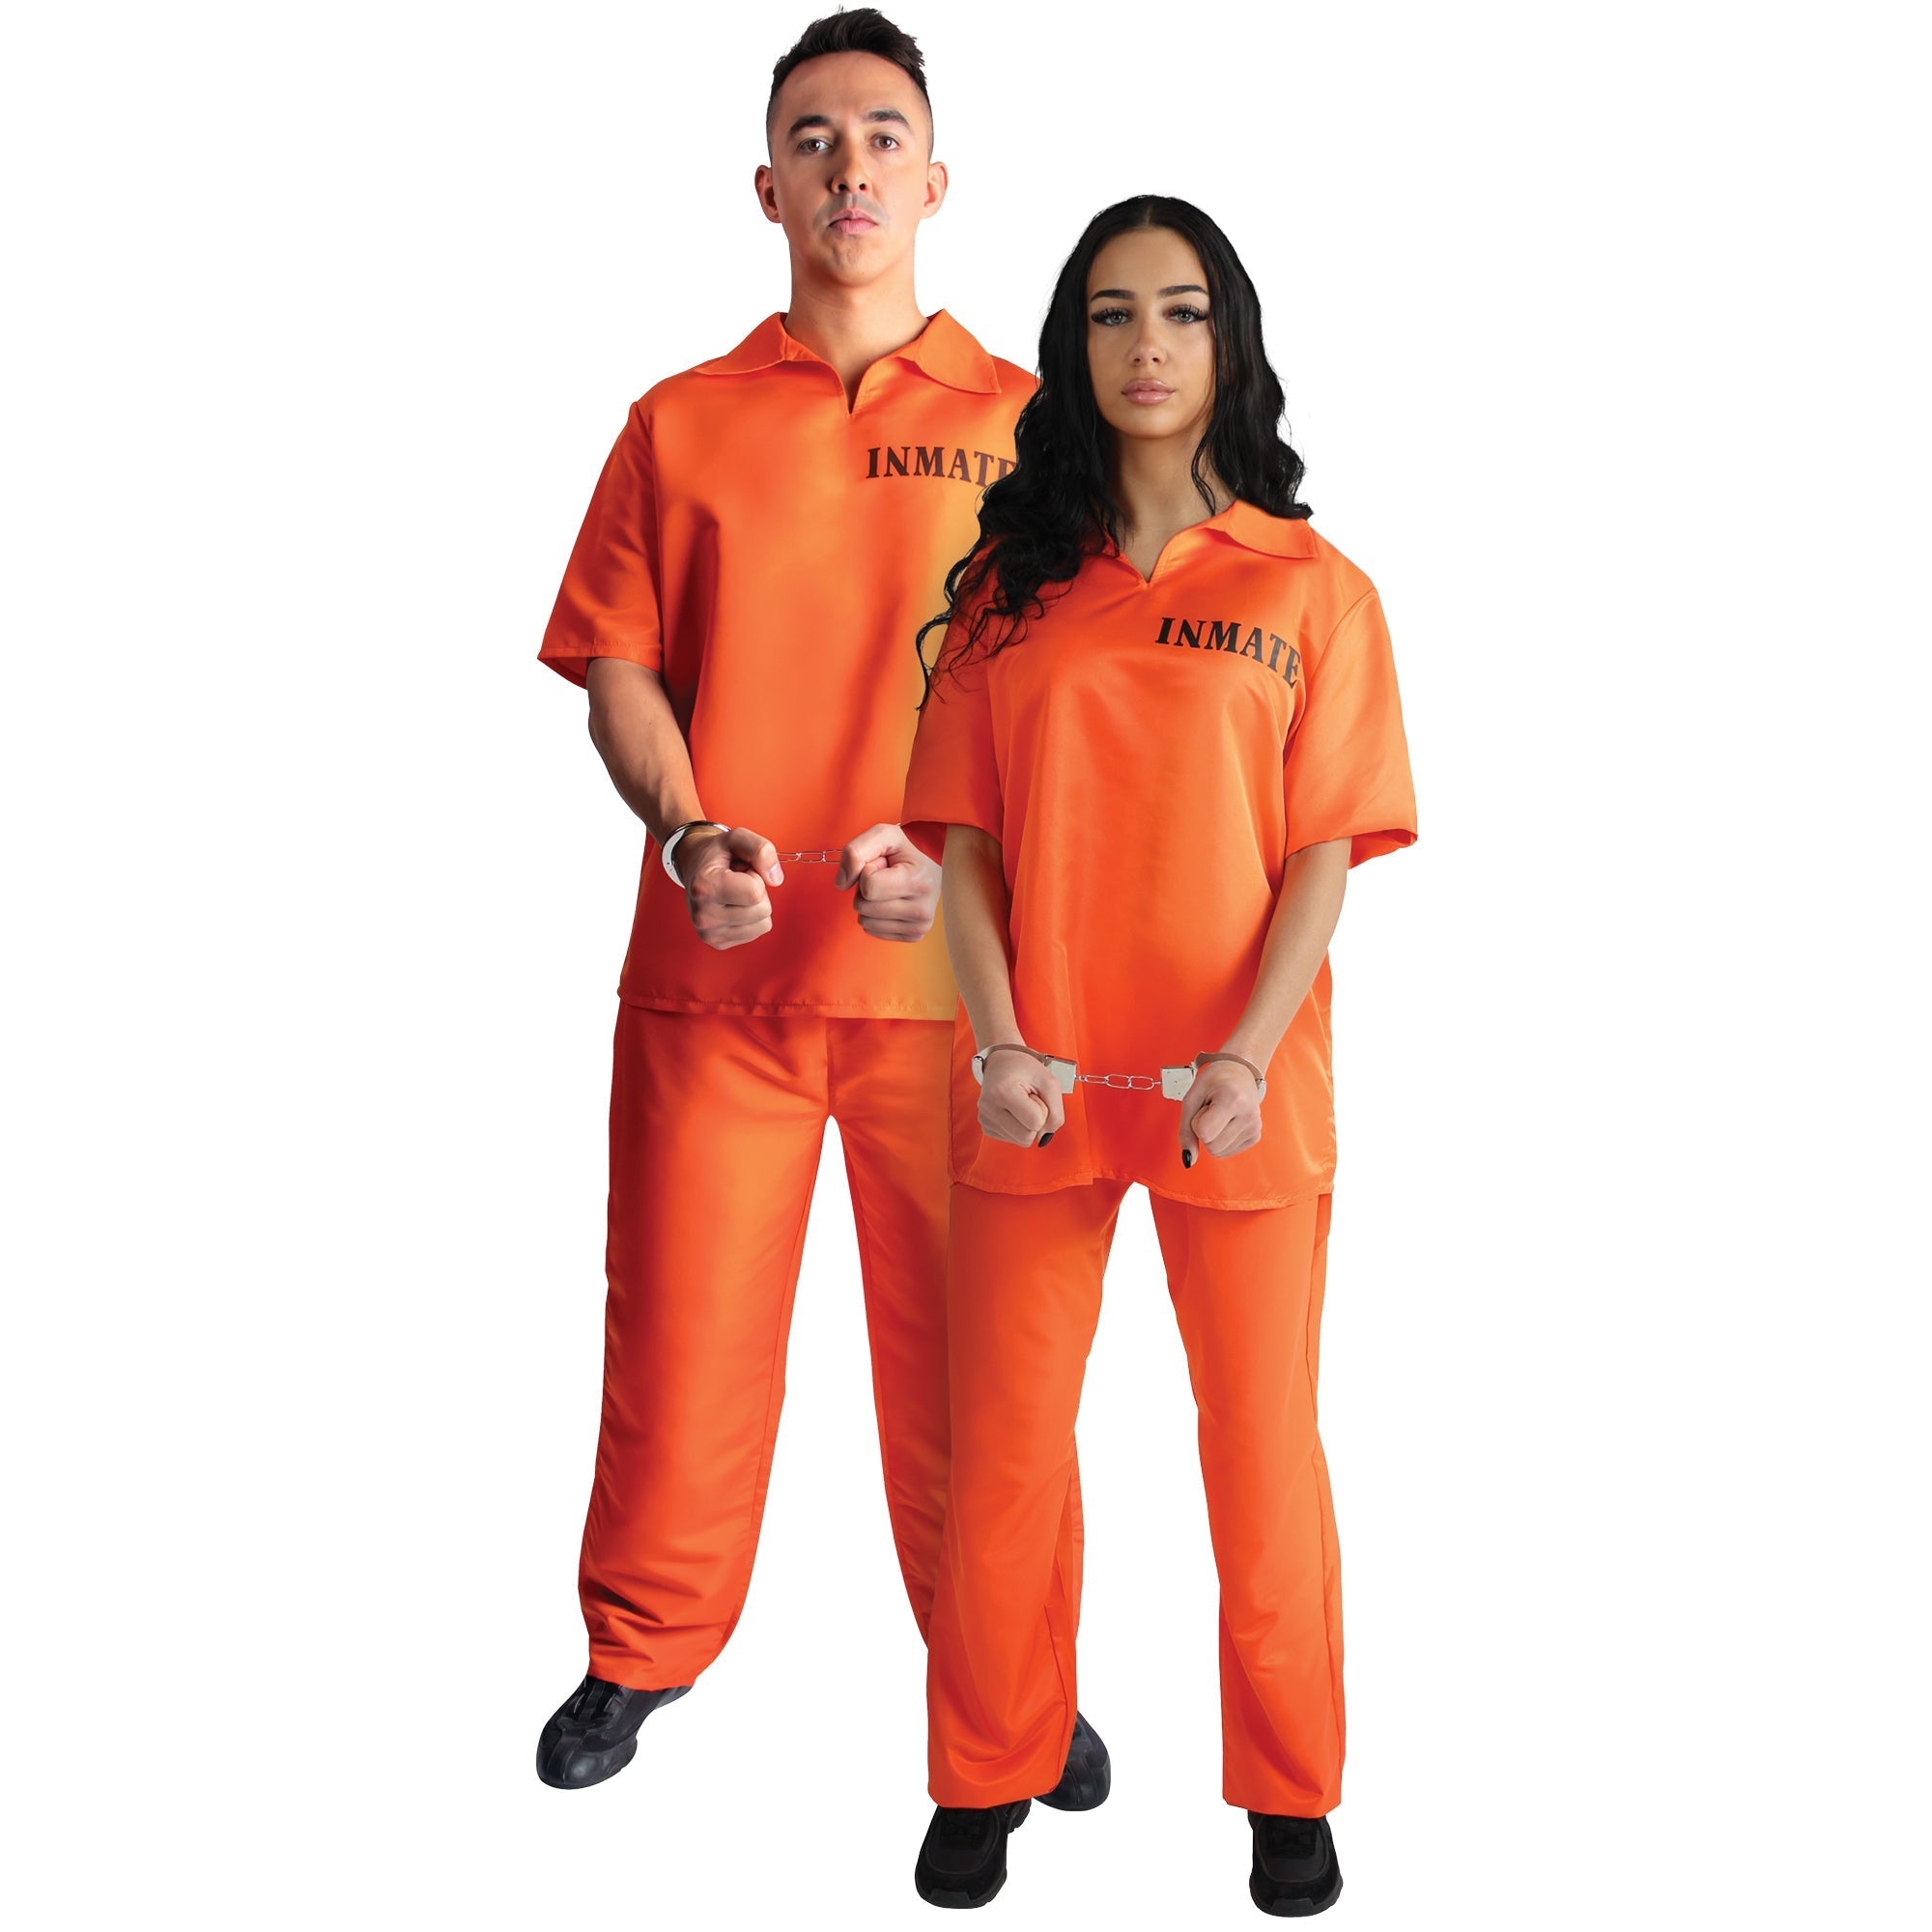 Inmate Costume for Adults, Orange Top and Pants – Party Expert